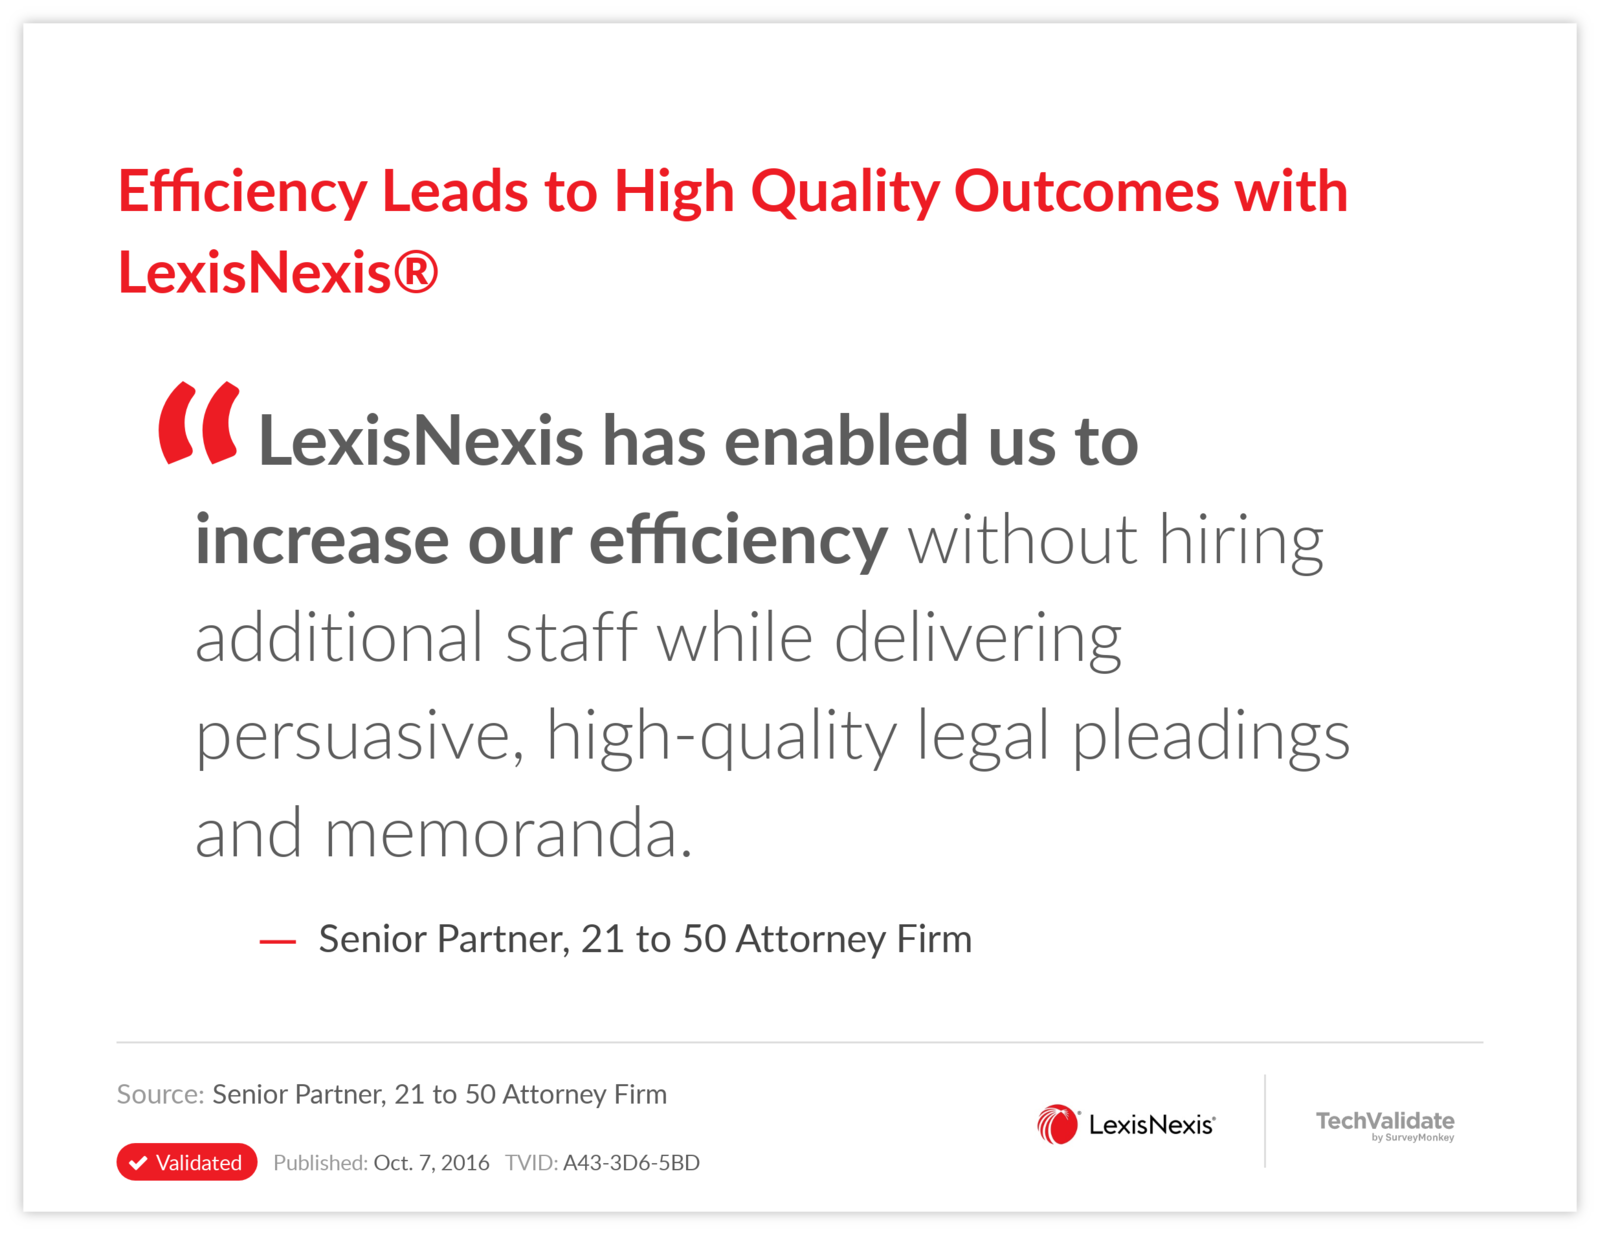 Efficiency Leads to High Quality Outcomes with LexisNexis®